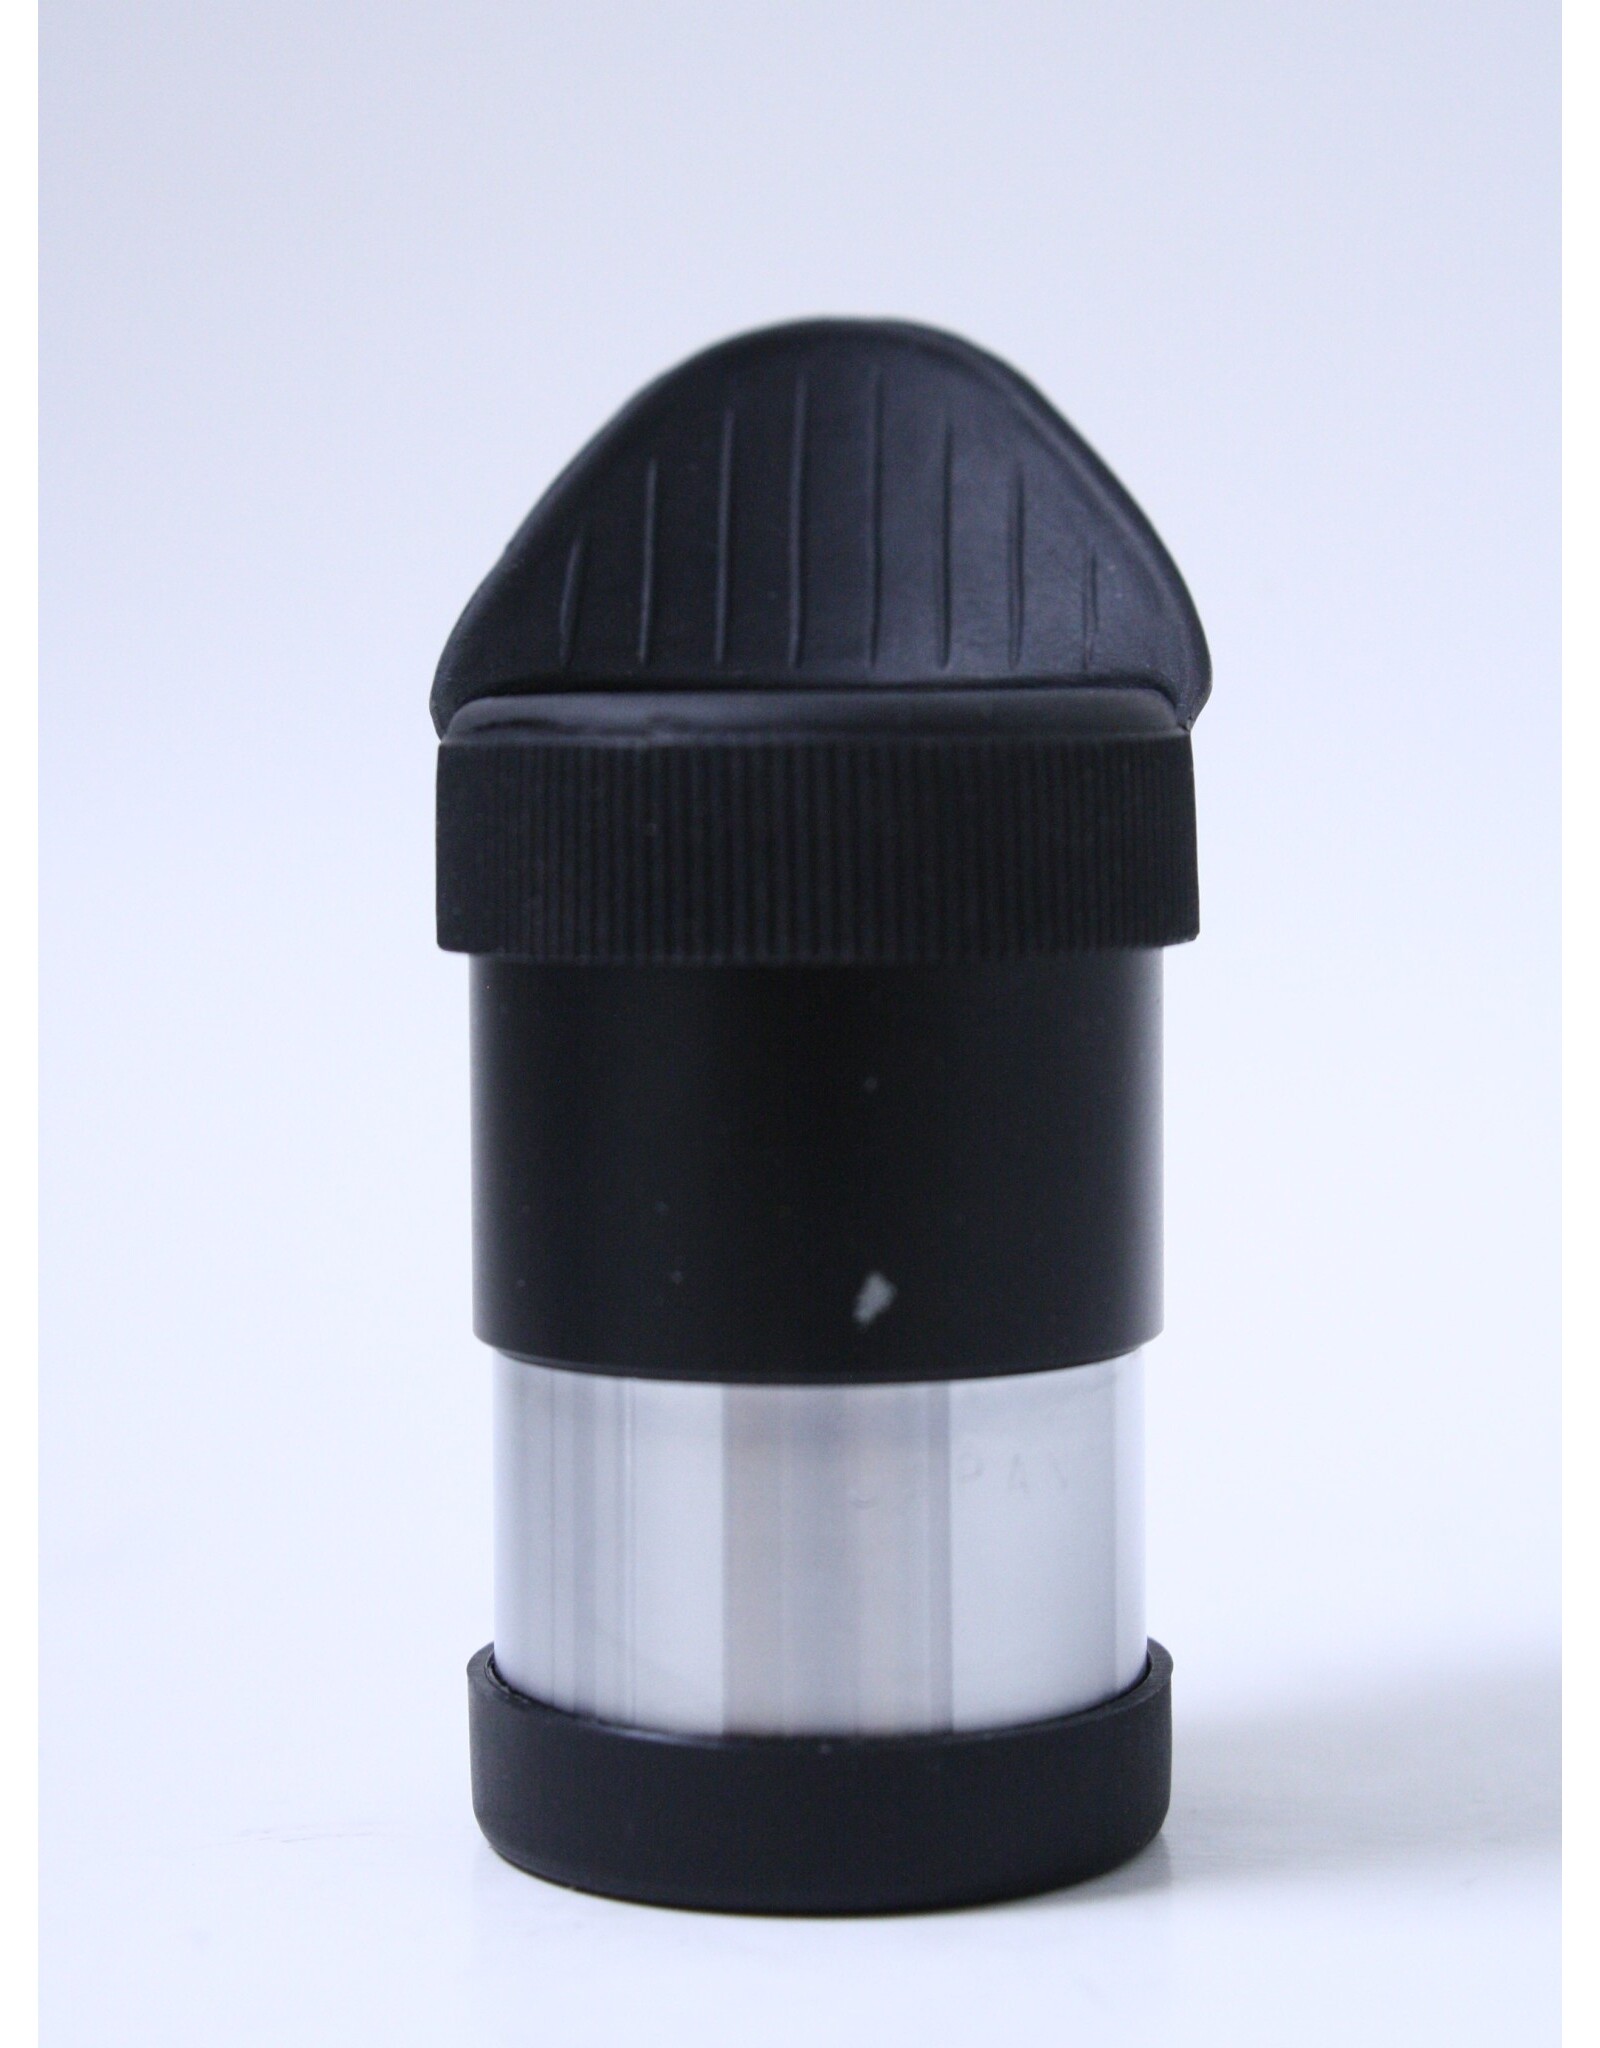 Orion Orion 10mm  Ultrascopic Double Crosshair Reticle Eyepiece